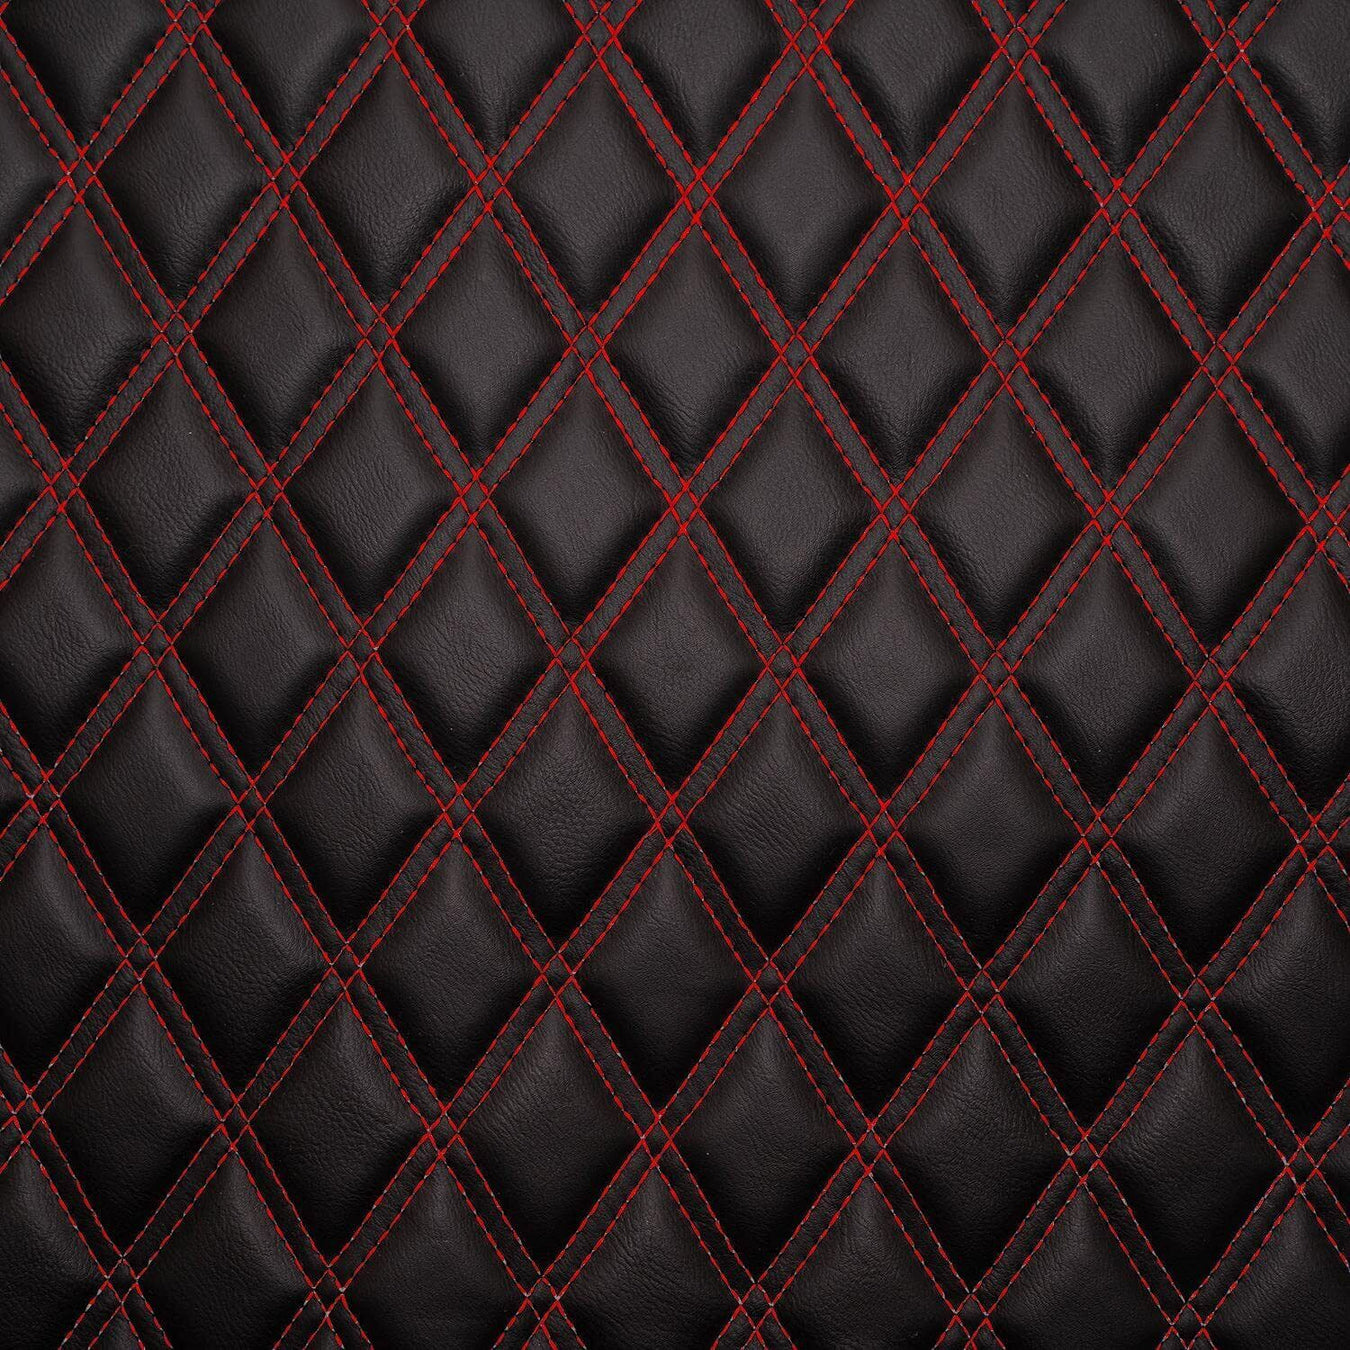 Diamond Quilted Padded Faux Leather Upholstery Fabric